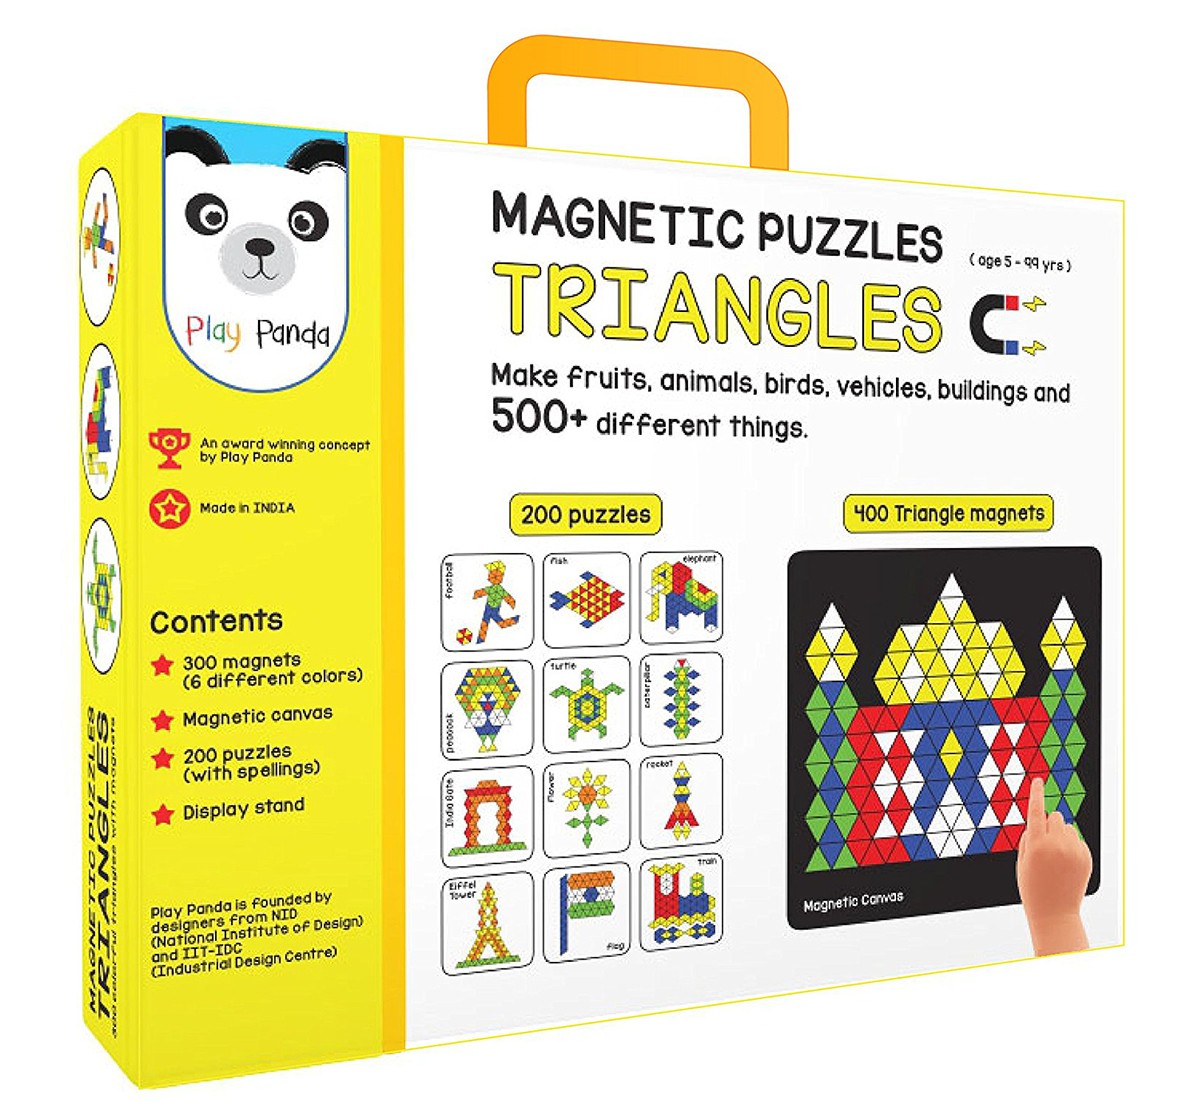 Play Panda Magnetic Puzzles Triangles With 400 Magnets, 200 Puzzles, Magnetic Board And Display Stand,  4Y+ (Multicolor)